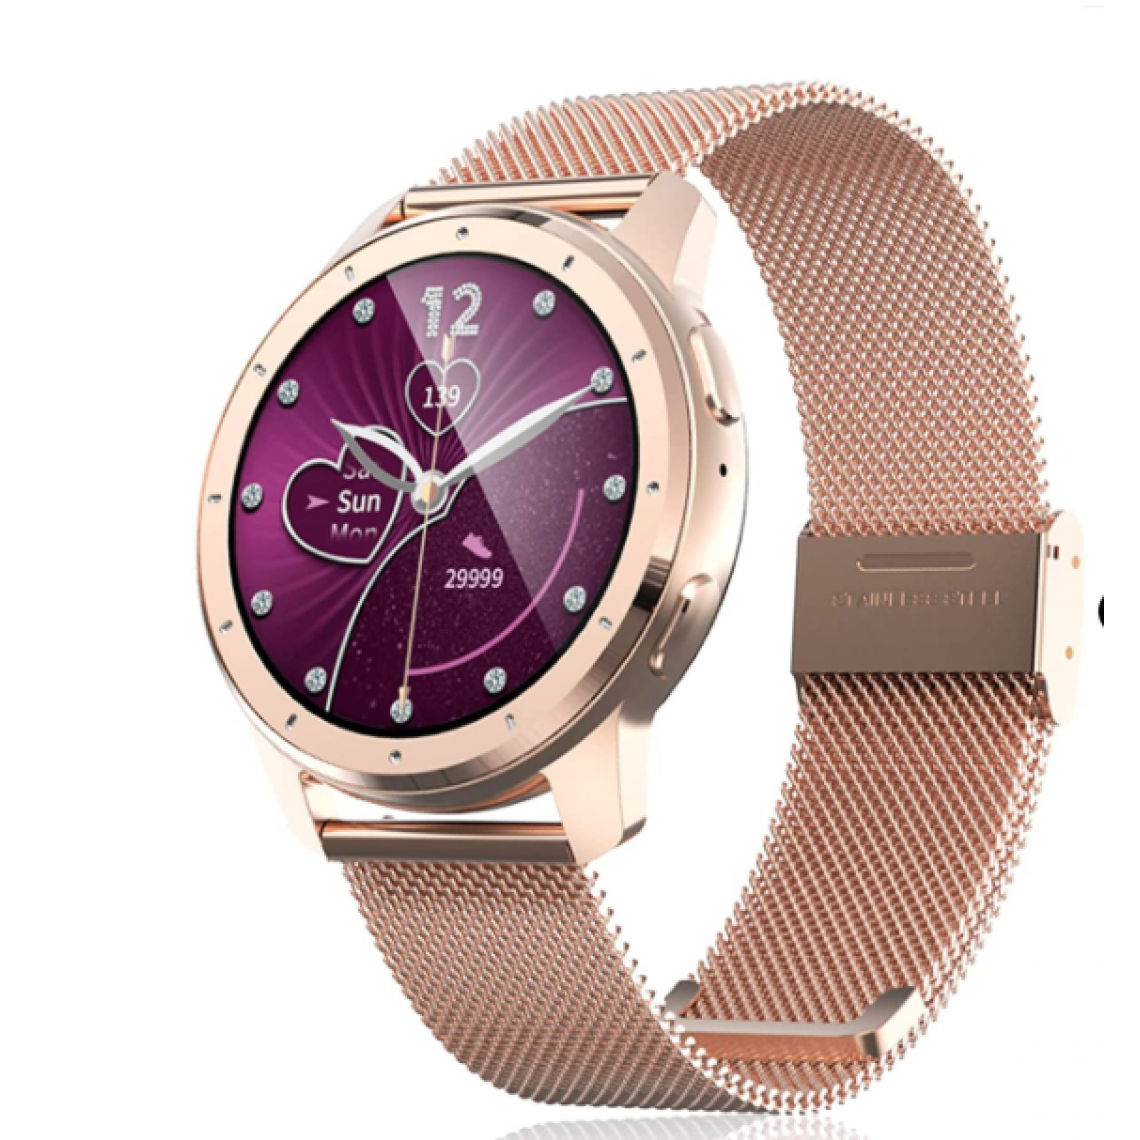 Chronotech Montres - Chronus 2022 Women's Smart Watch, Activity Tracker and Smart Watch with Heart Rate/Blood Pressure/Sleep Monitor, Waterproof with Text and Callï¼goldï¼ - Montre connectée